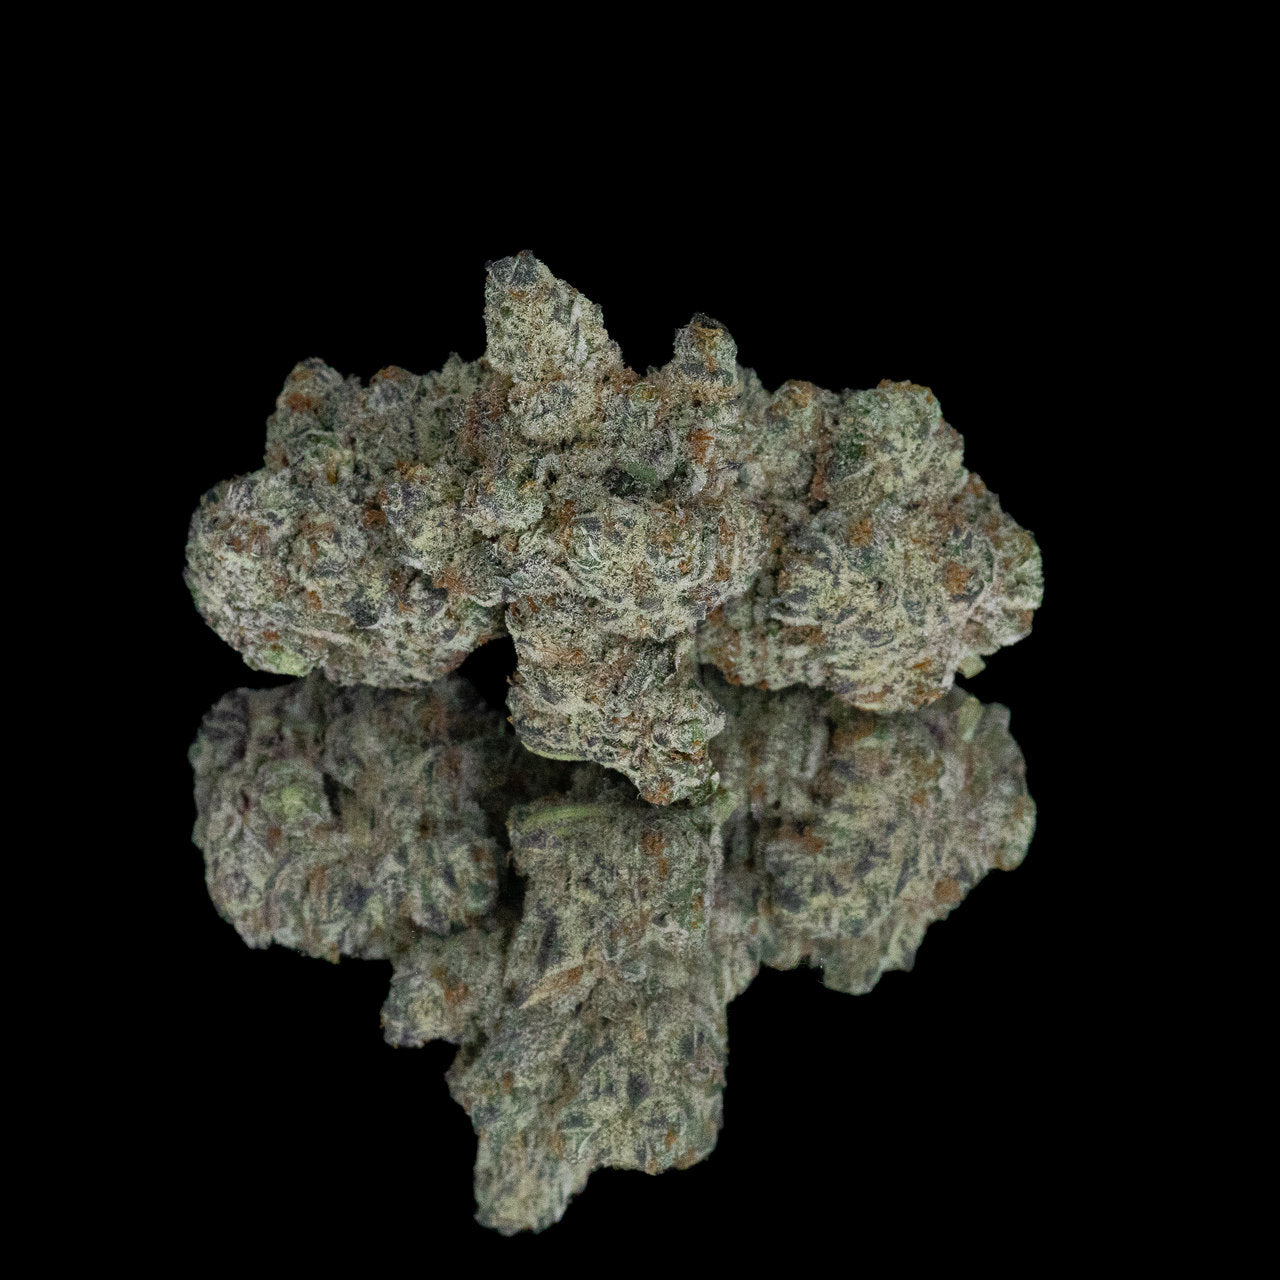 Three nugs of cannabis flower from the London Pound Cake strain rest against their reflection on a black surface.